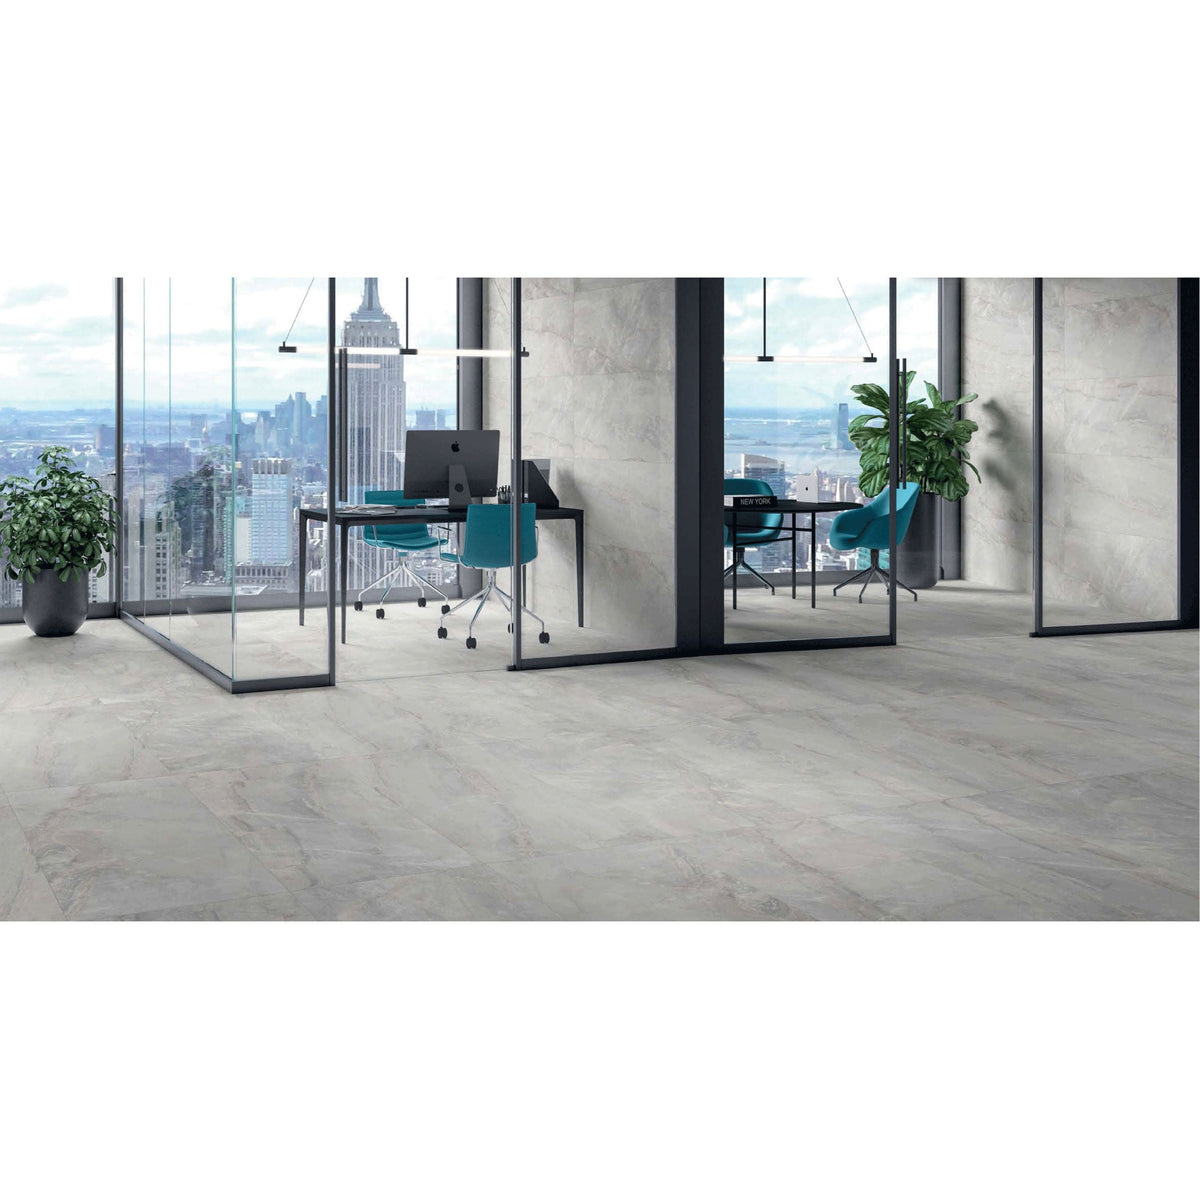 Cobsa - Sylvia Series 12 in. x 24 in. Rectified Porcelain Tile - Polished Light Grey Installed